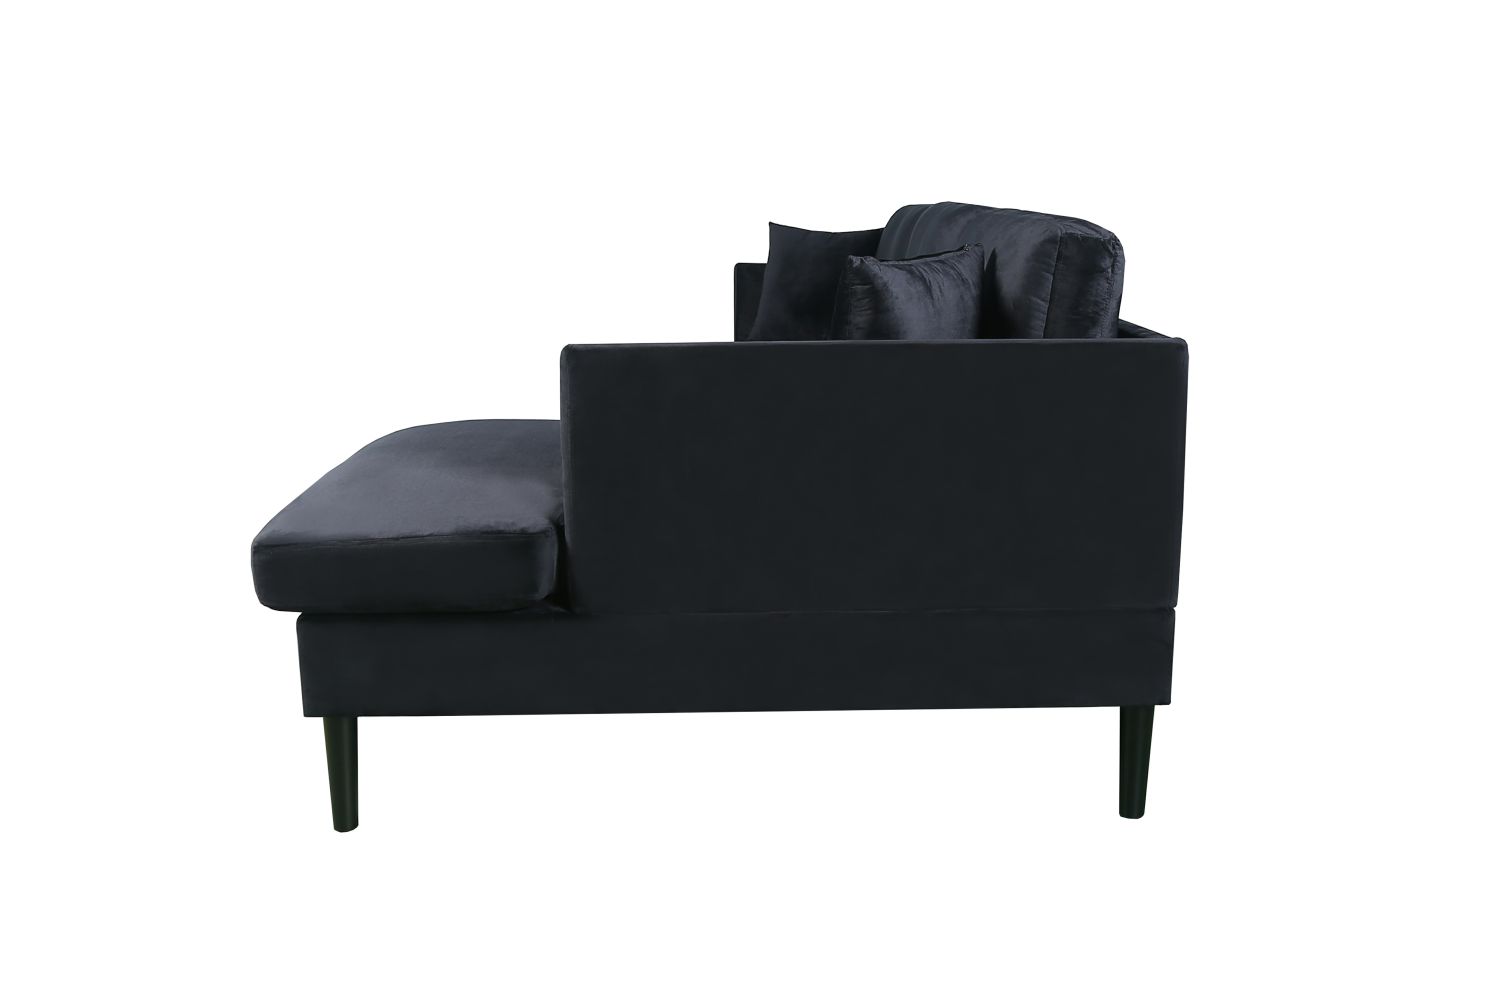 L-shape Sectional Sofa Velvet Right Hand Facing with Solid Wood Legs and Removable and Washable Seat Cover，Black - image 5 of 7